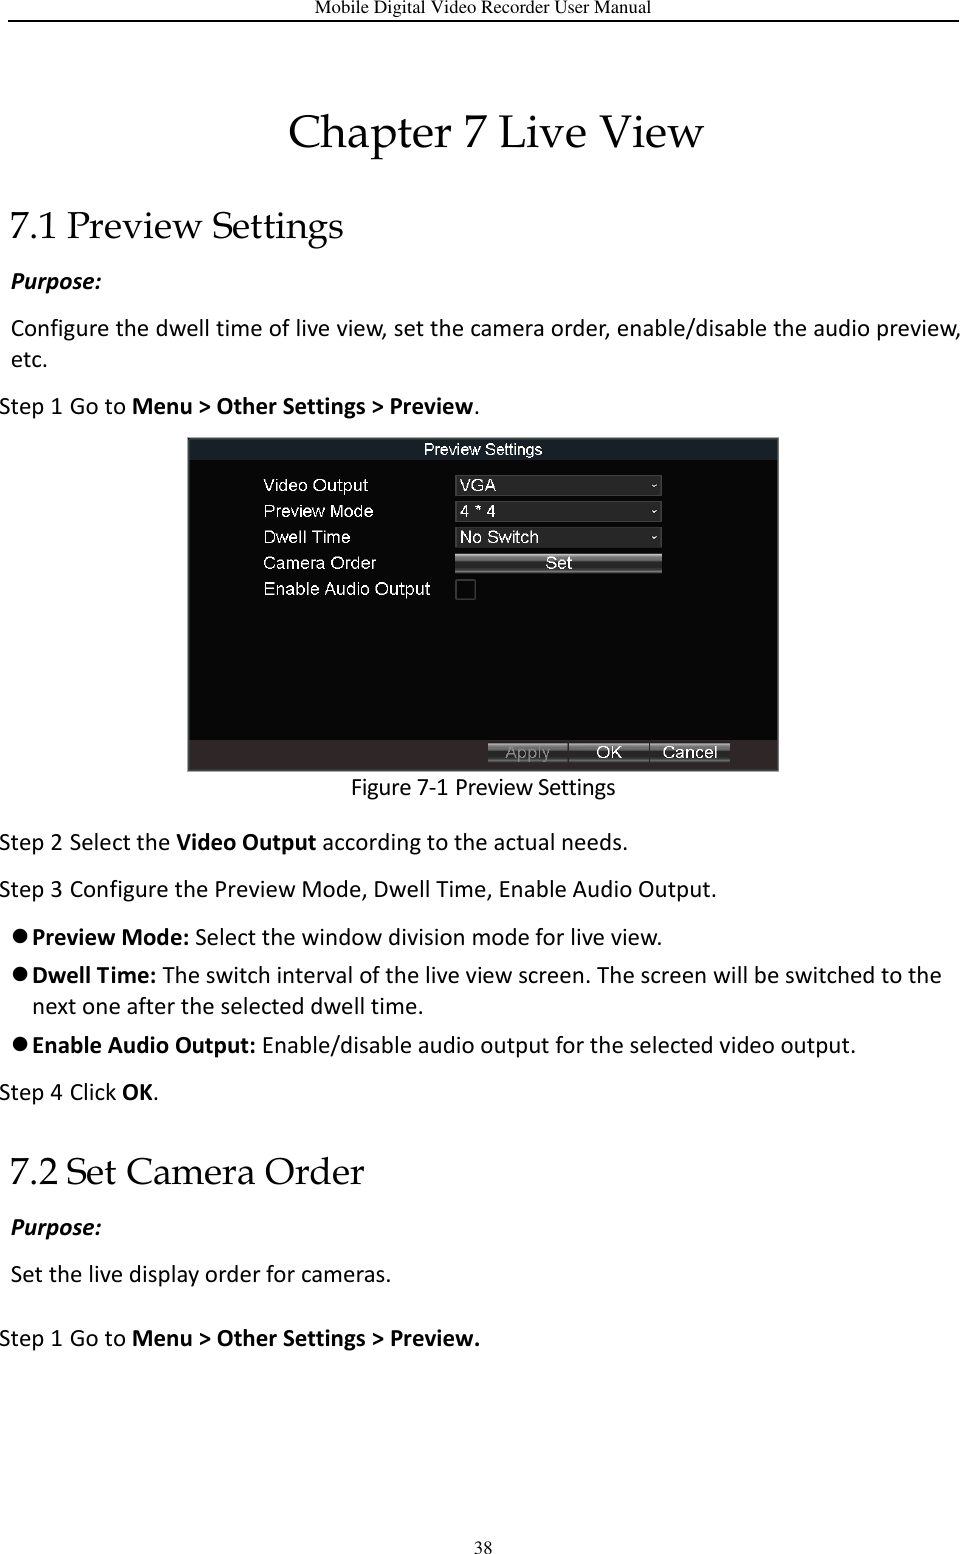 Mobile Digital Video Recorder User Manual 38 Chapter 7 Live View 7.1 Preview Settings Purpose:   Configure the dwell time of live view, set the camera order, enable/disable the audio preview, etc. Step 1 Go to Menu &gt; Other Settings &gt; Preview.  Figure 7-1 Preview Settings Step 2 Select the Video Output according to the actual needs. Step 3 Configure the Preview Mode, Dwell Time, Enable Audio Output.  Preview Mode: Select the window division mode for live view.  Dwell Time: The switch interval of the live view screen. The screen will be switched to the next one after the selected dwell time.  Enable Audio Output: Enable/disable audio output for the selected video output. Step 4 Click OK. 7.2 Set Camera Order Purpose: Set the live display order for cameras. Step 1 Go to Menu &gt; Other Settings &gt; Preview. 